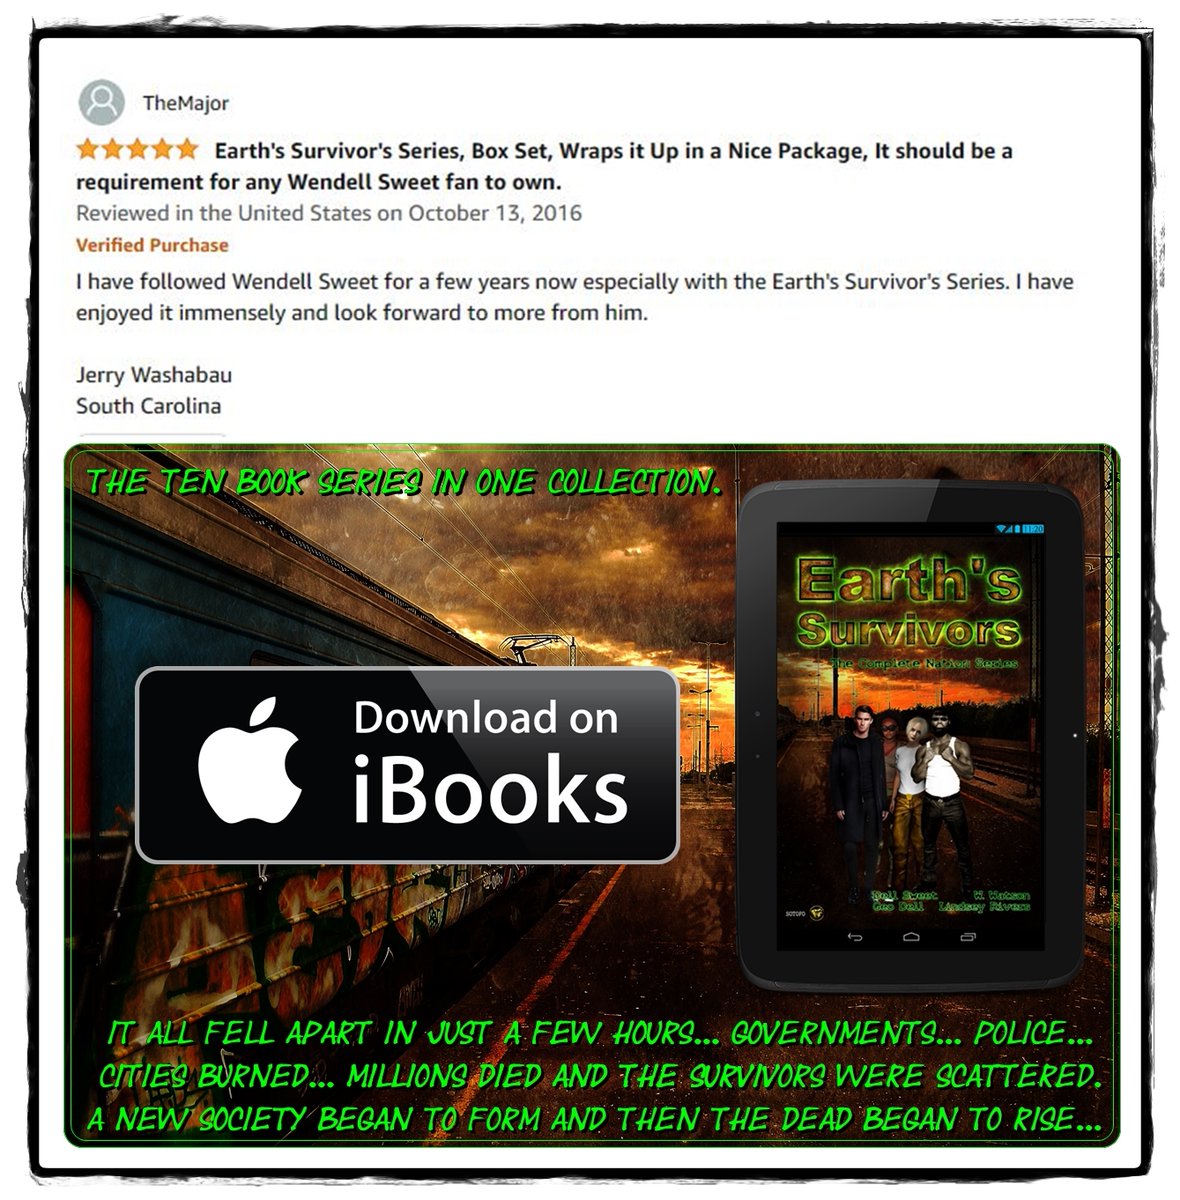 Expand your library with Earth's Survivors the Nation Collection for $6.99. This includes all ten uncut and complete Nation Books! Don't miss this chance! #ApocalypticFiction #Horror #EndOfTheWorld #Apple #Readers #BookLovers #BookWorm #BookDeals 1l.ink/PLV4JGW